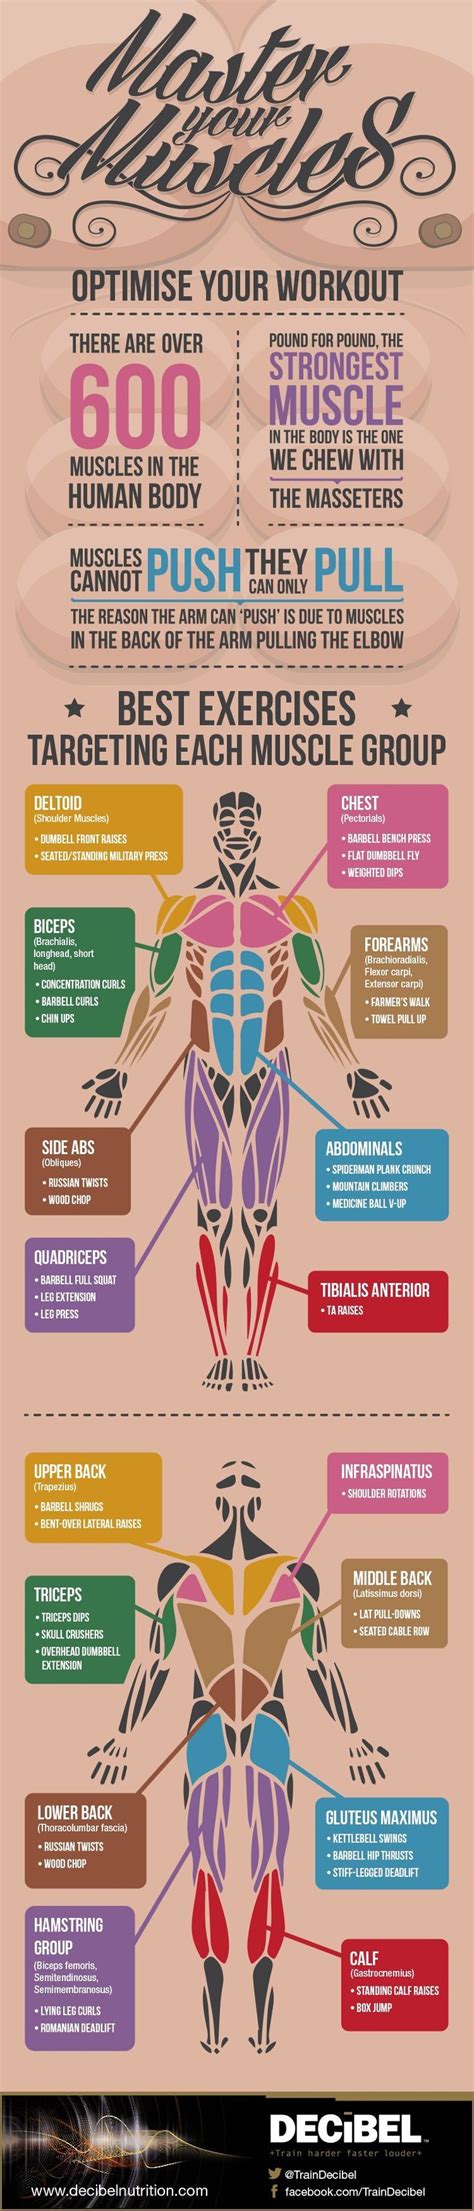 Usually derived from latin, a muscle's name often tells you something about the muscle, such as its location, origin, number of. Best 25+ Best group names ideas on Pinterest | Workout muscle groups, Ab challenge workout and ...